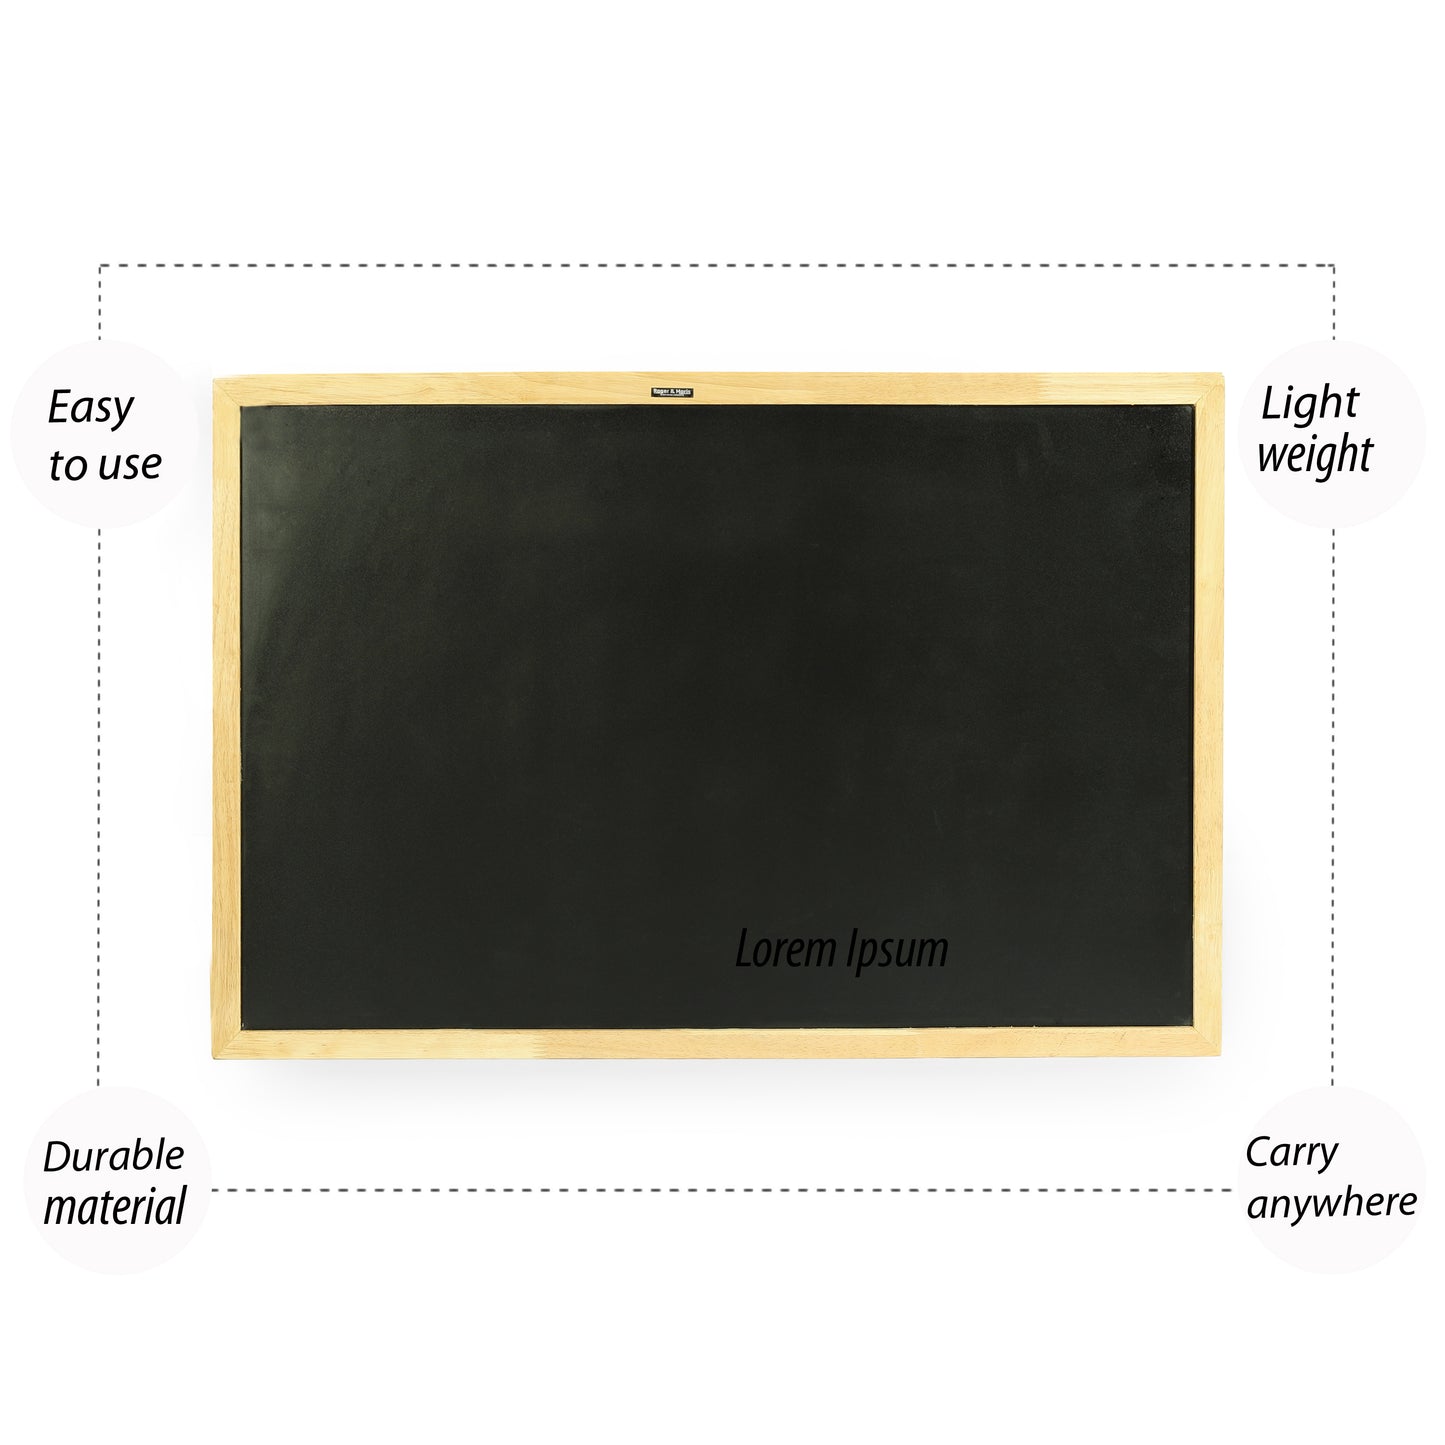 Roger & Moris Wooden (Rubber Wood) Framed Chalk Board - Non Magnetic, Lightweight for Home, Office and School (Black, Size : 3 feet x 4 feet)